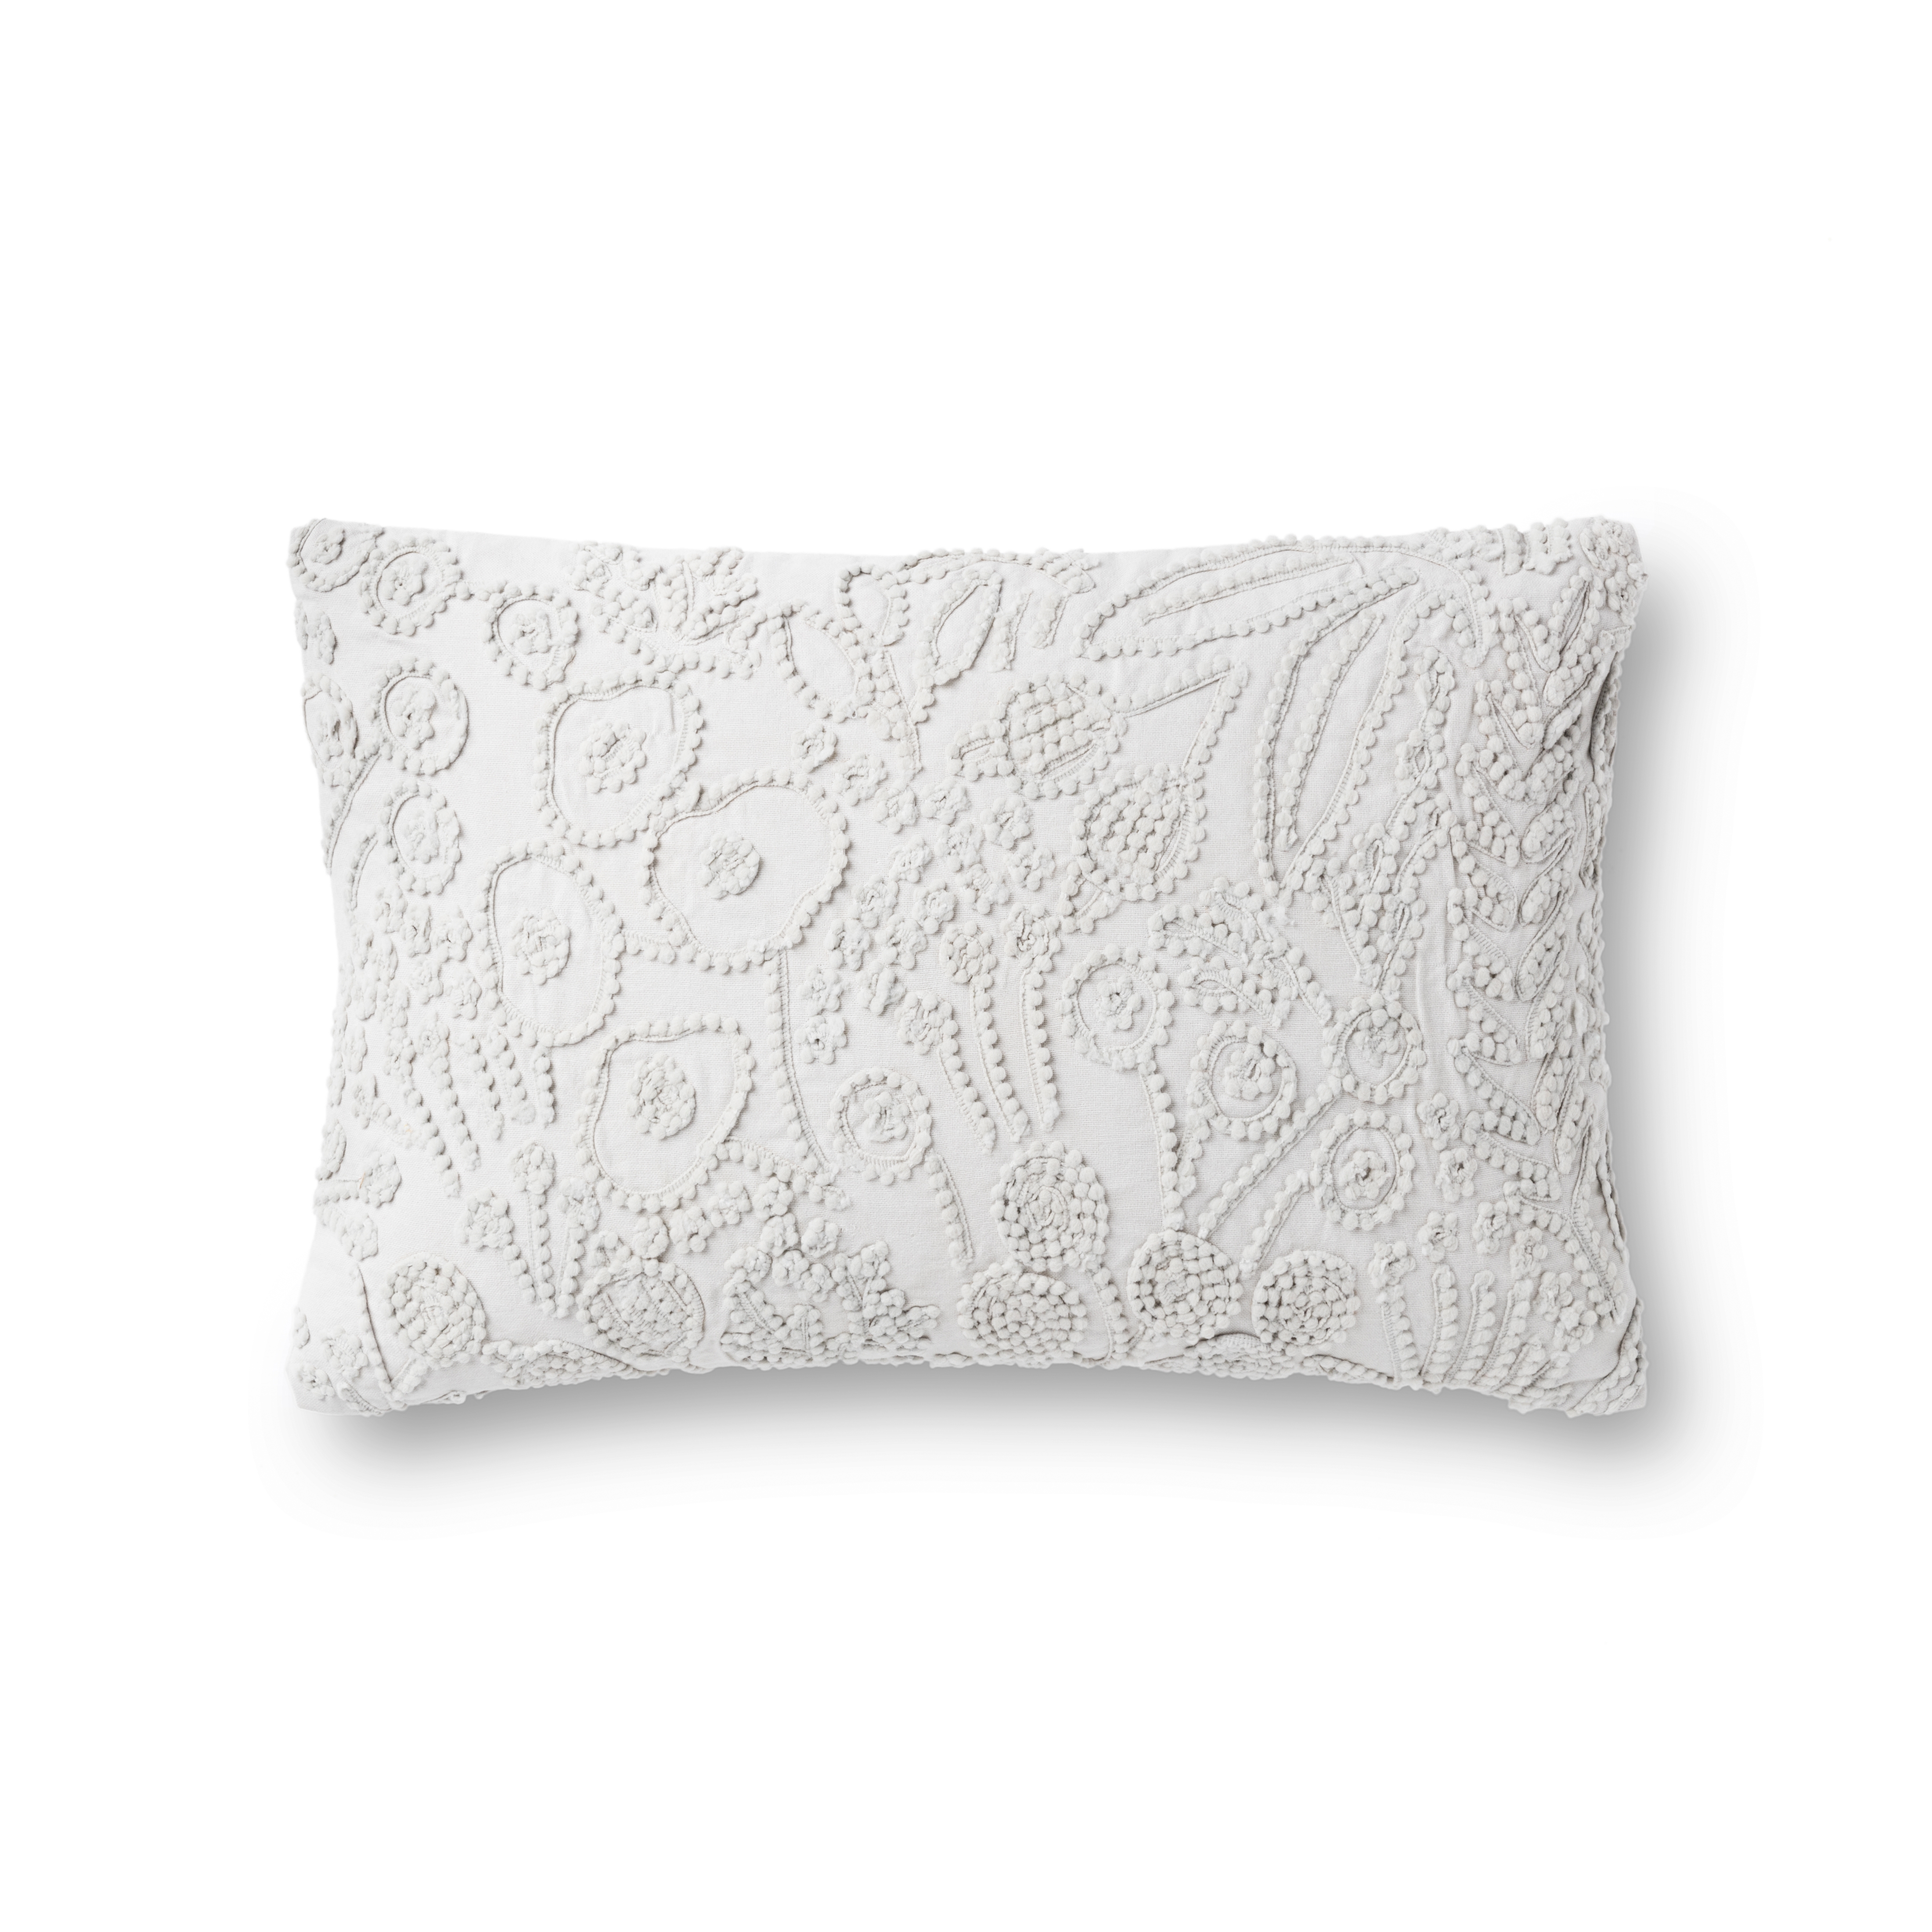 Rifle Paper Co. x Loloi PILLOWS P6030 GREY 13" x 21" Cover Only - Image 0